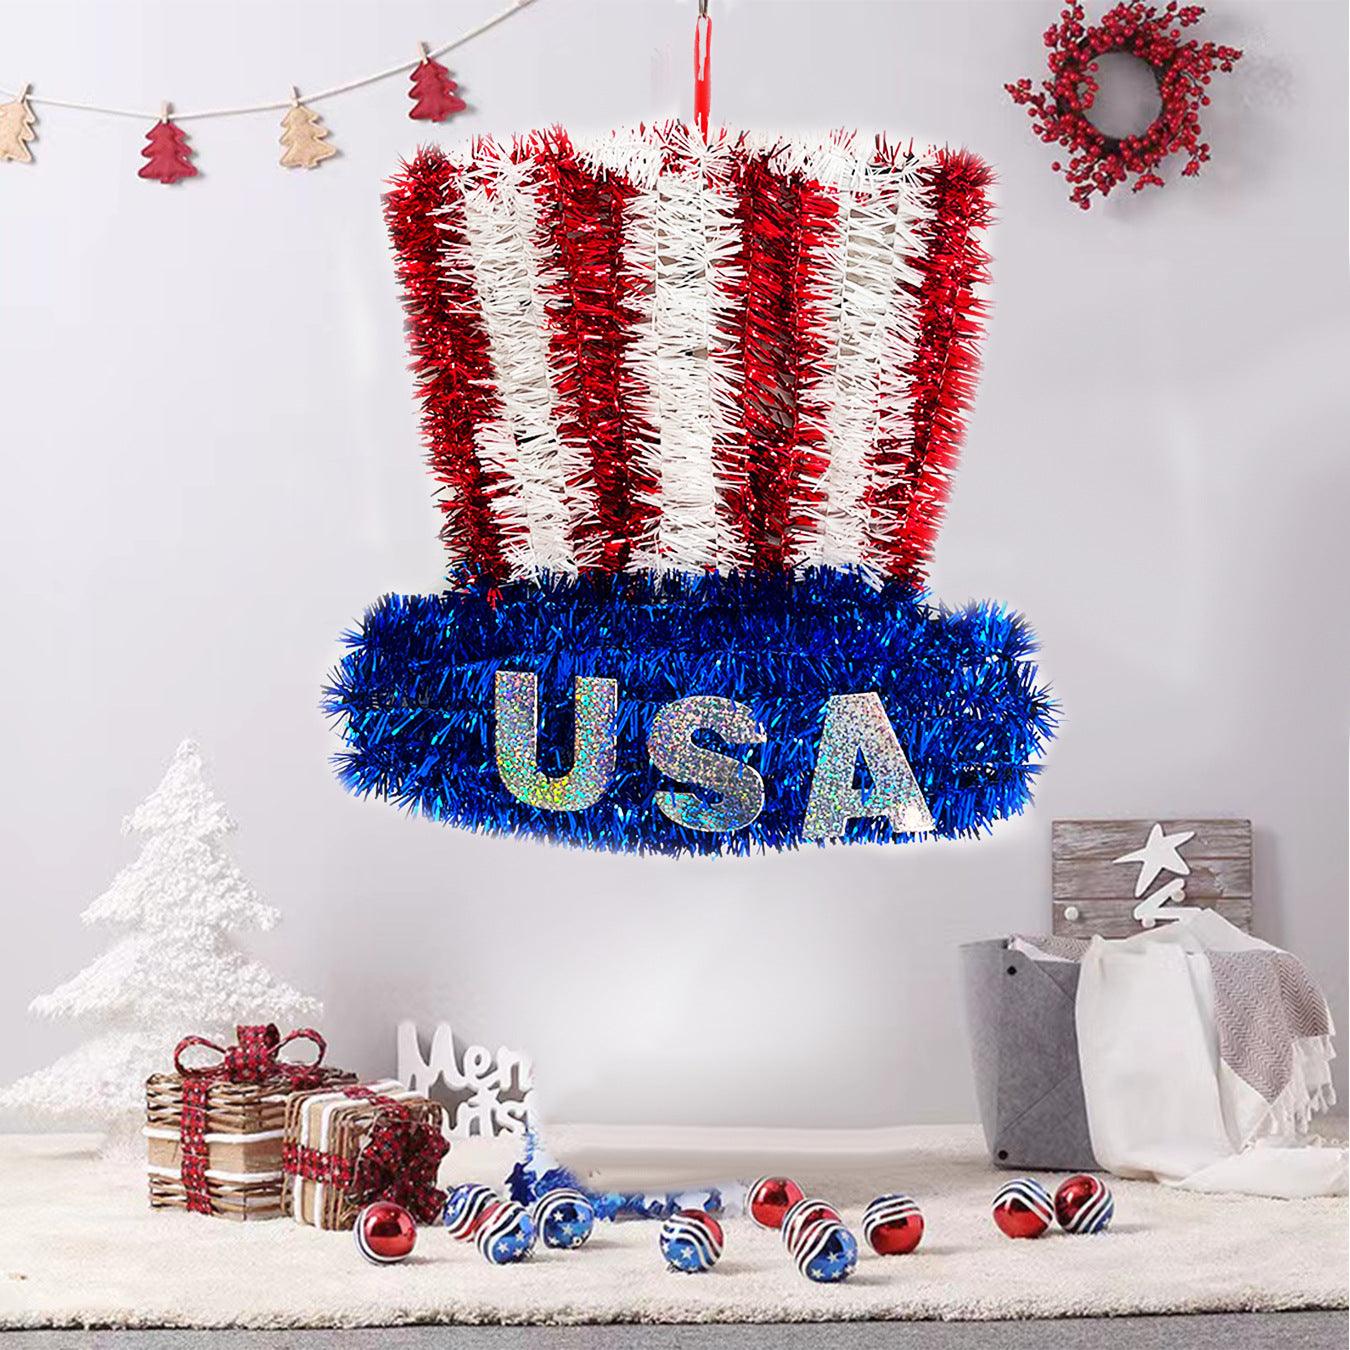  Red, White And Blue Wreath Wall Hanging Decoration Door Hanging, July 4th banners, 4th of July decorations, American flag decorations, Patriotic decorations, Red, white and blue decorations, July 4th wreaths, July 4th garlands, July 4th centerpieces,